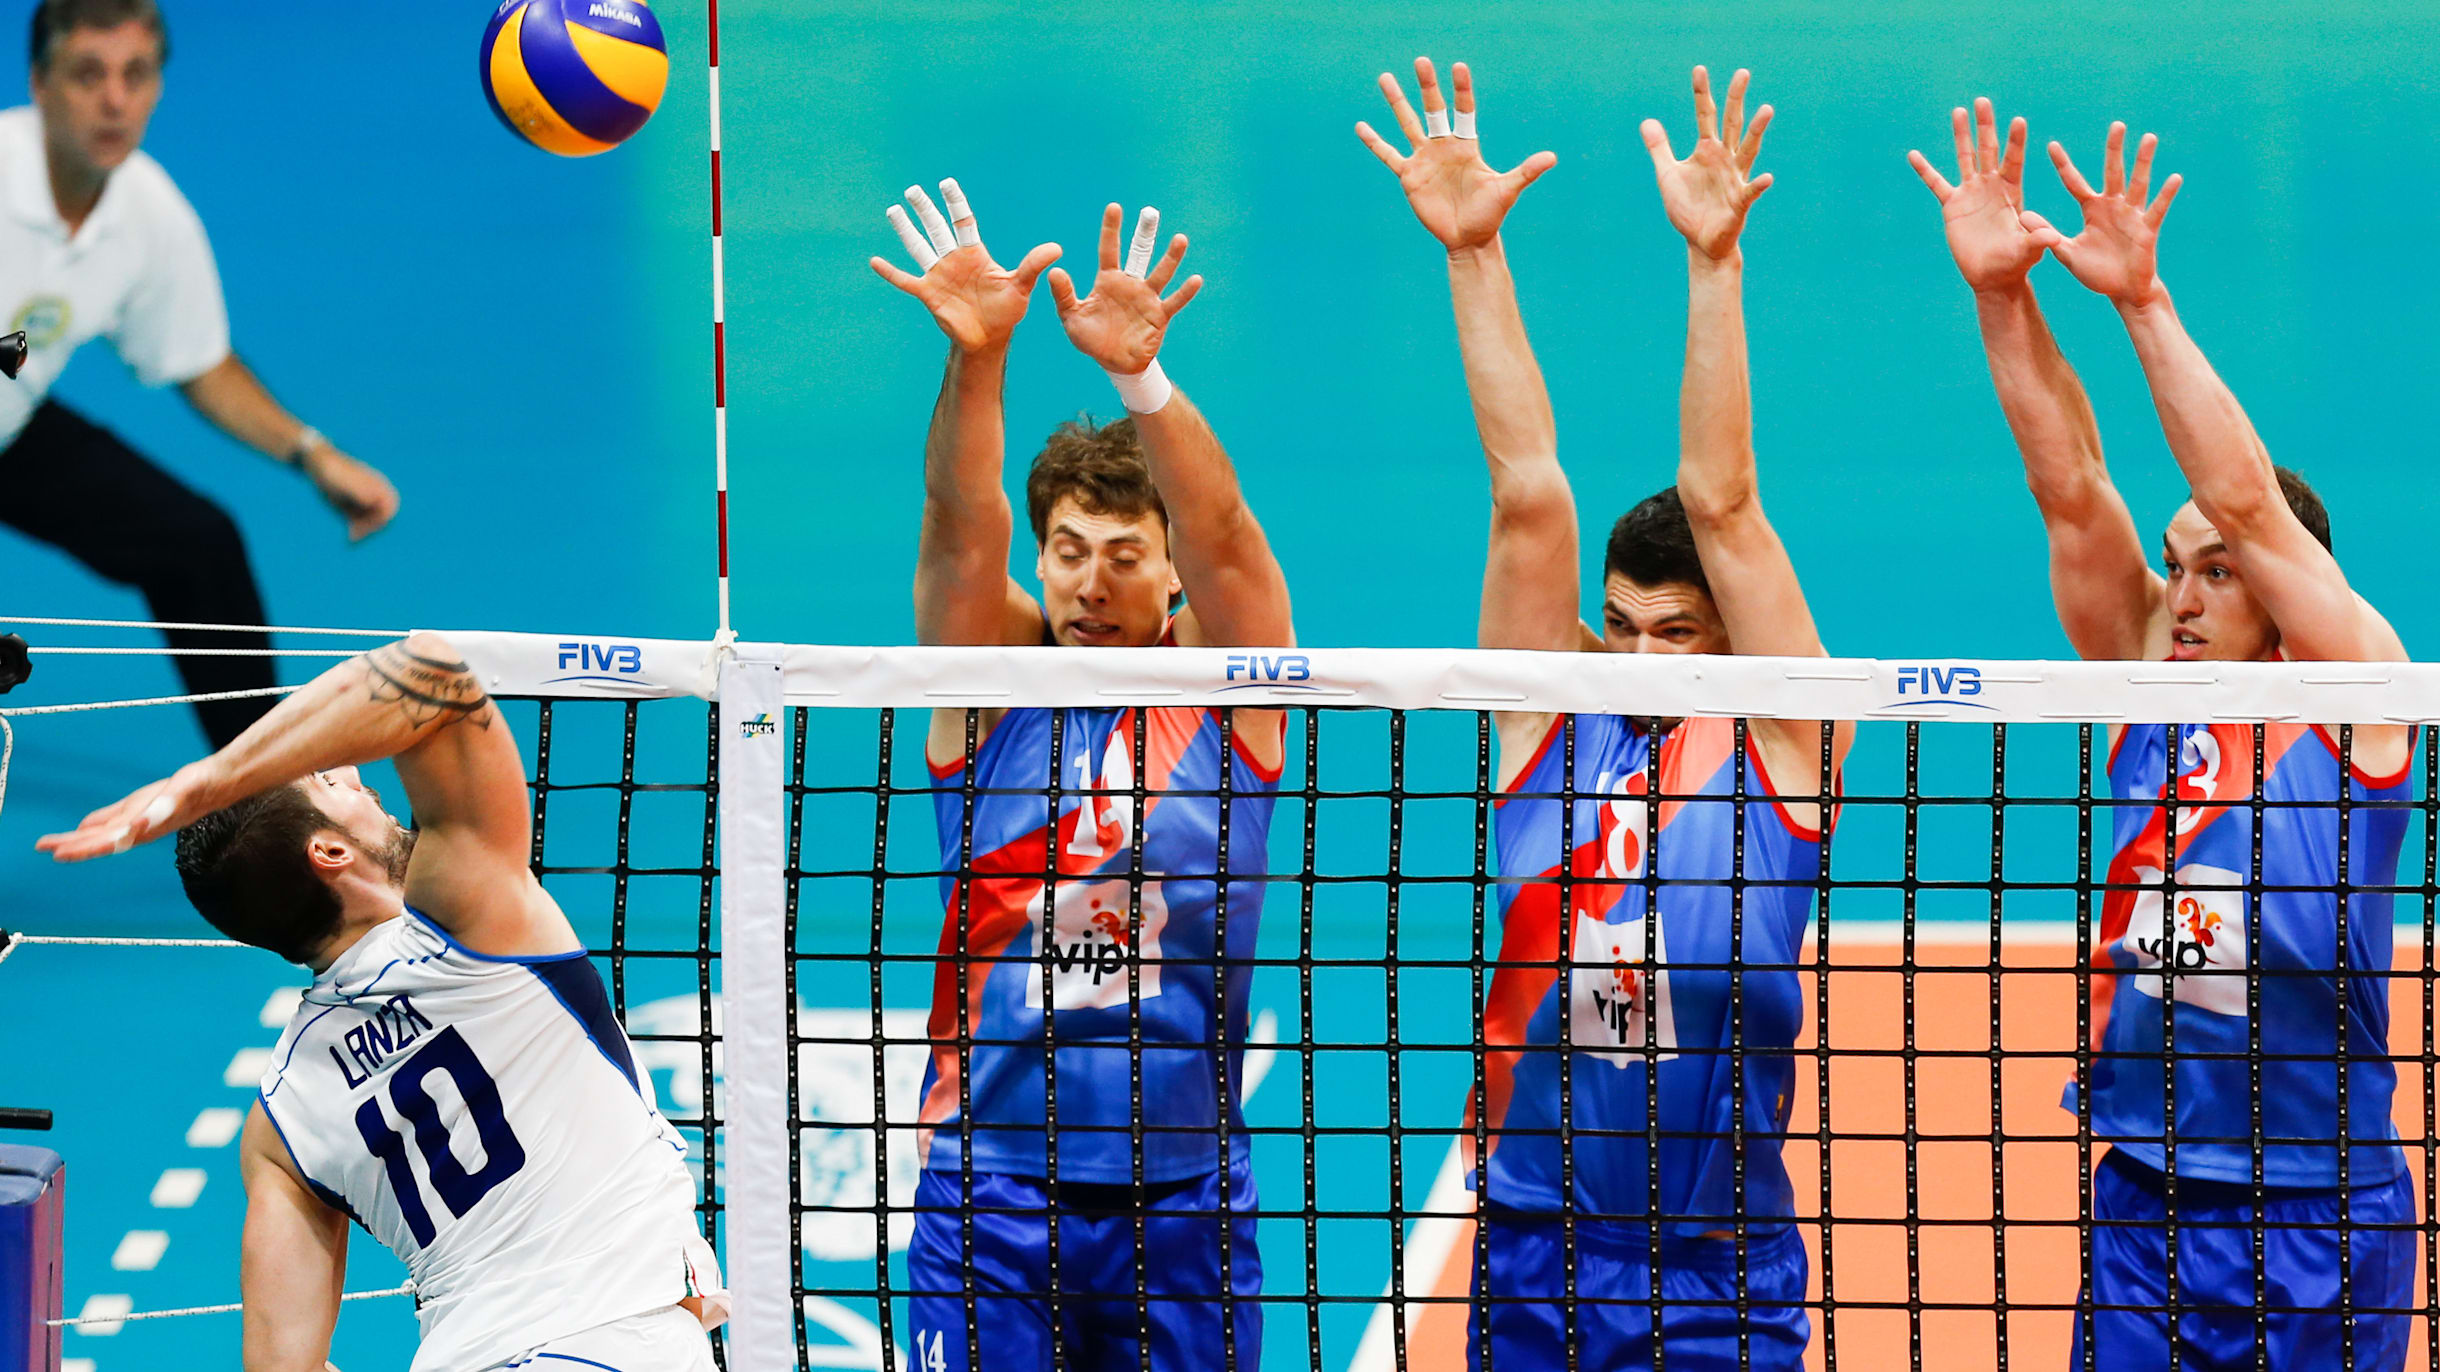 What Happens If a Volleyball Player Touches the Net?